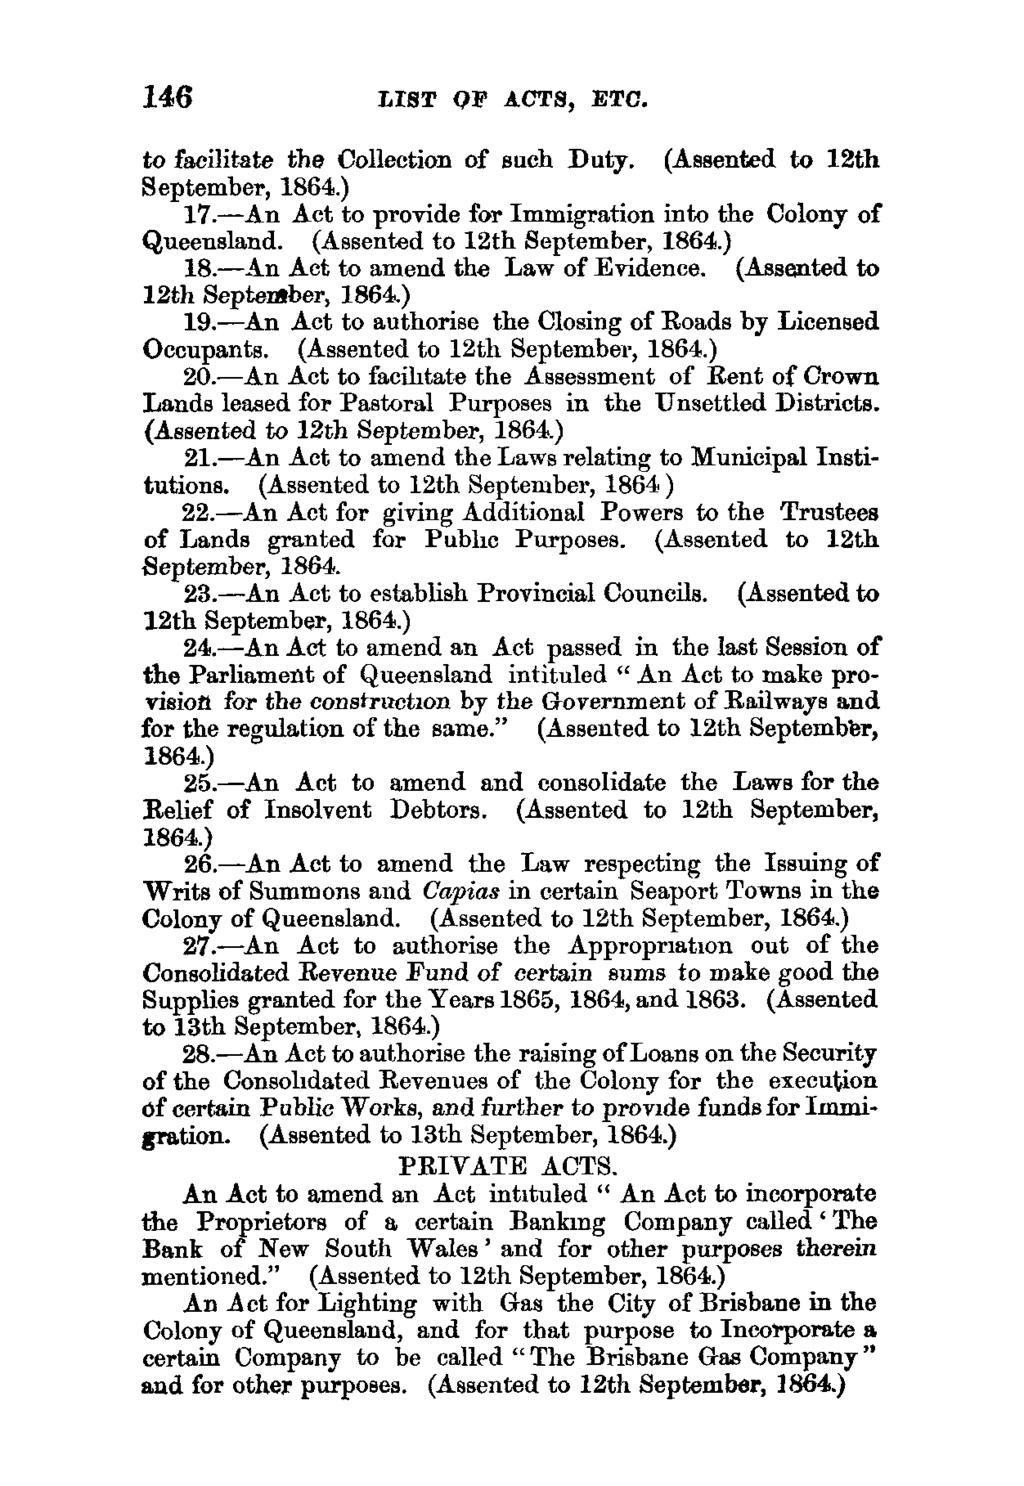 146 LIST OF ACTS, ETC. to facilitate the Collection of such Duty. (Assented to 12th September, 1864.) 17.-An Act to provide for Immigration into the Colony of Queensland.